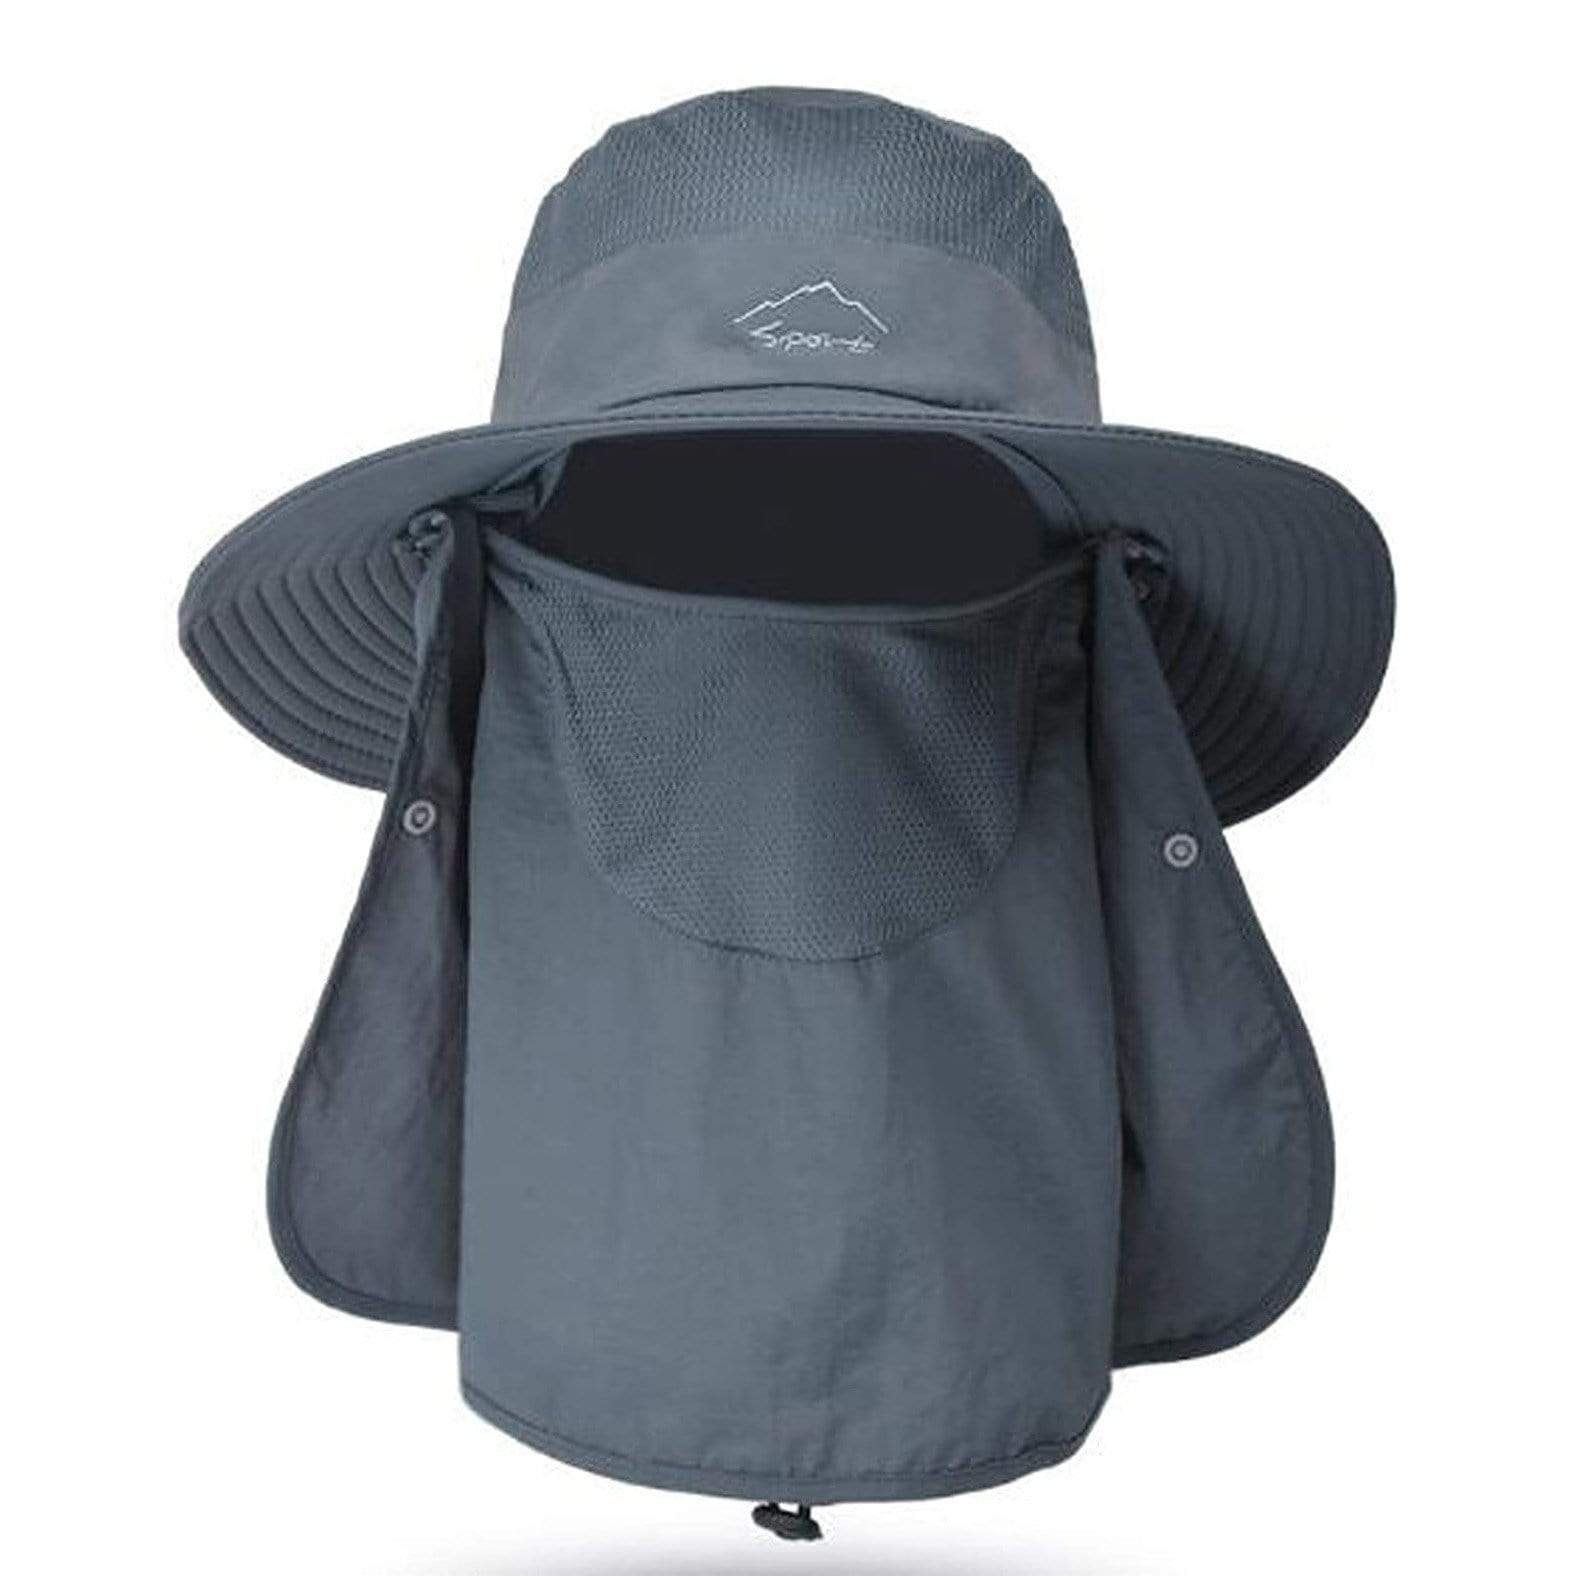 MIERSPORT Fishing Hat Sun Cap with Removable Face Neck Cover